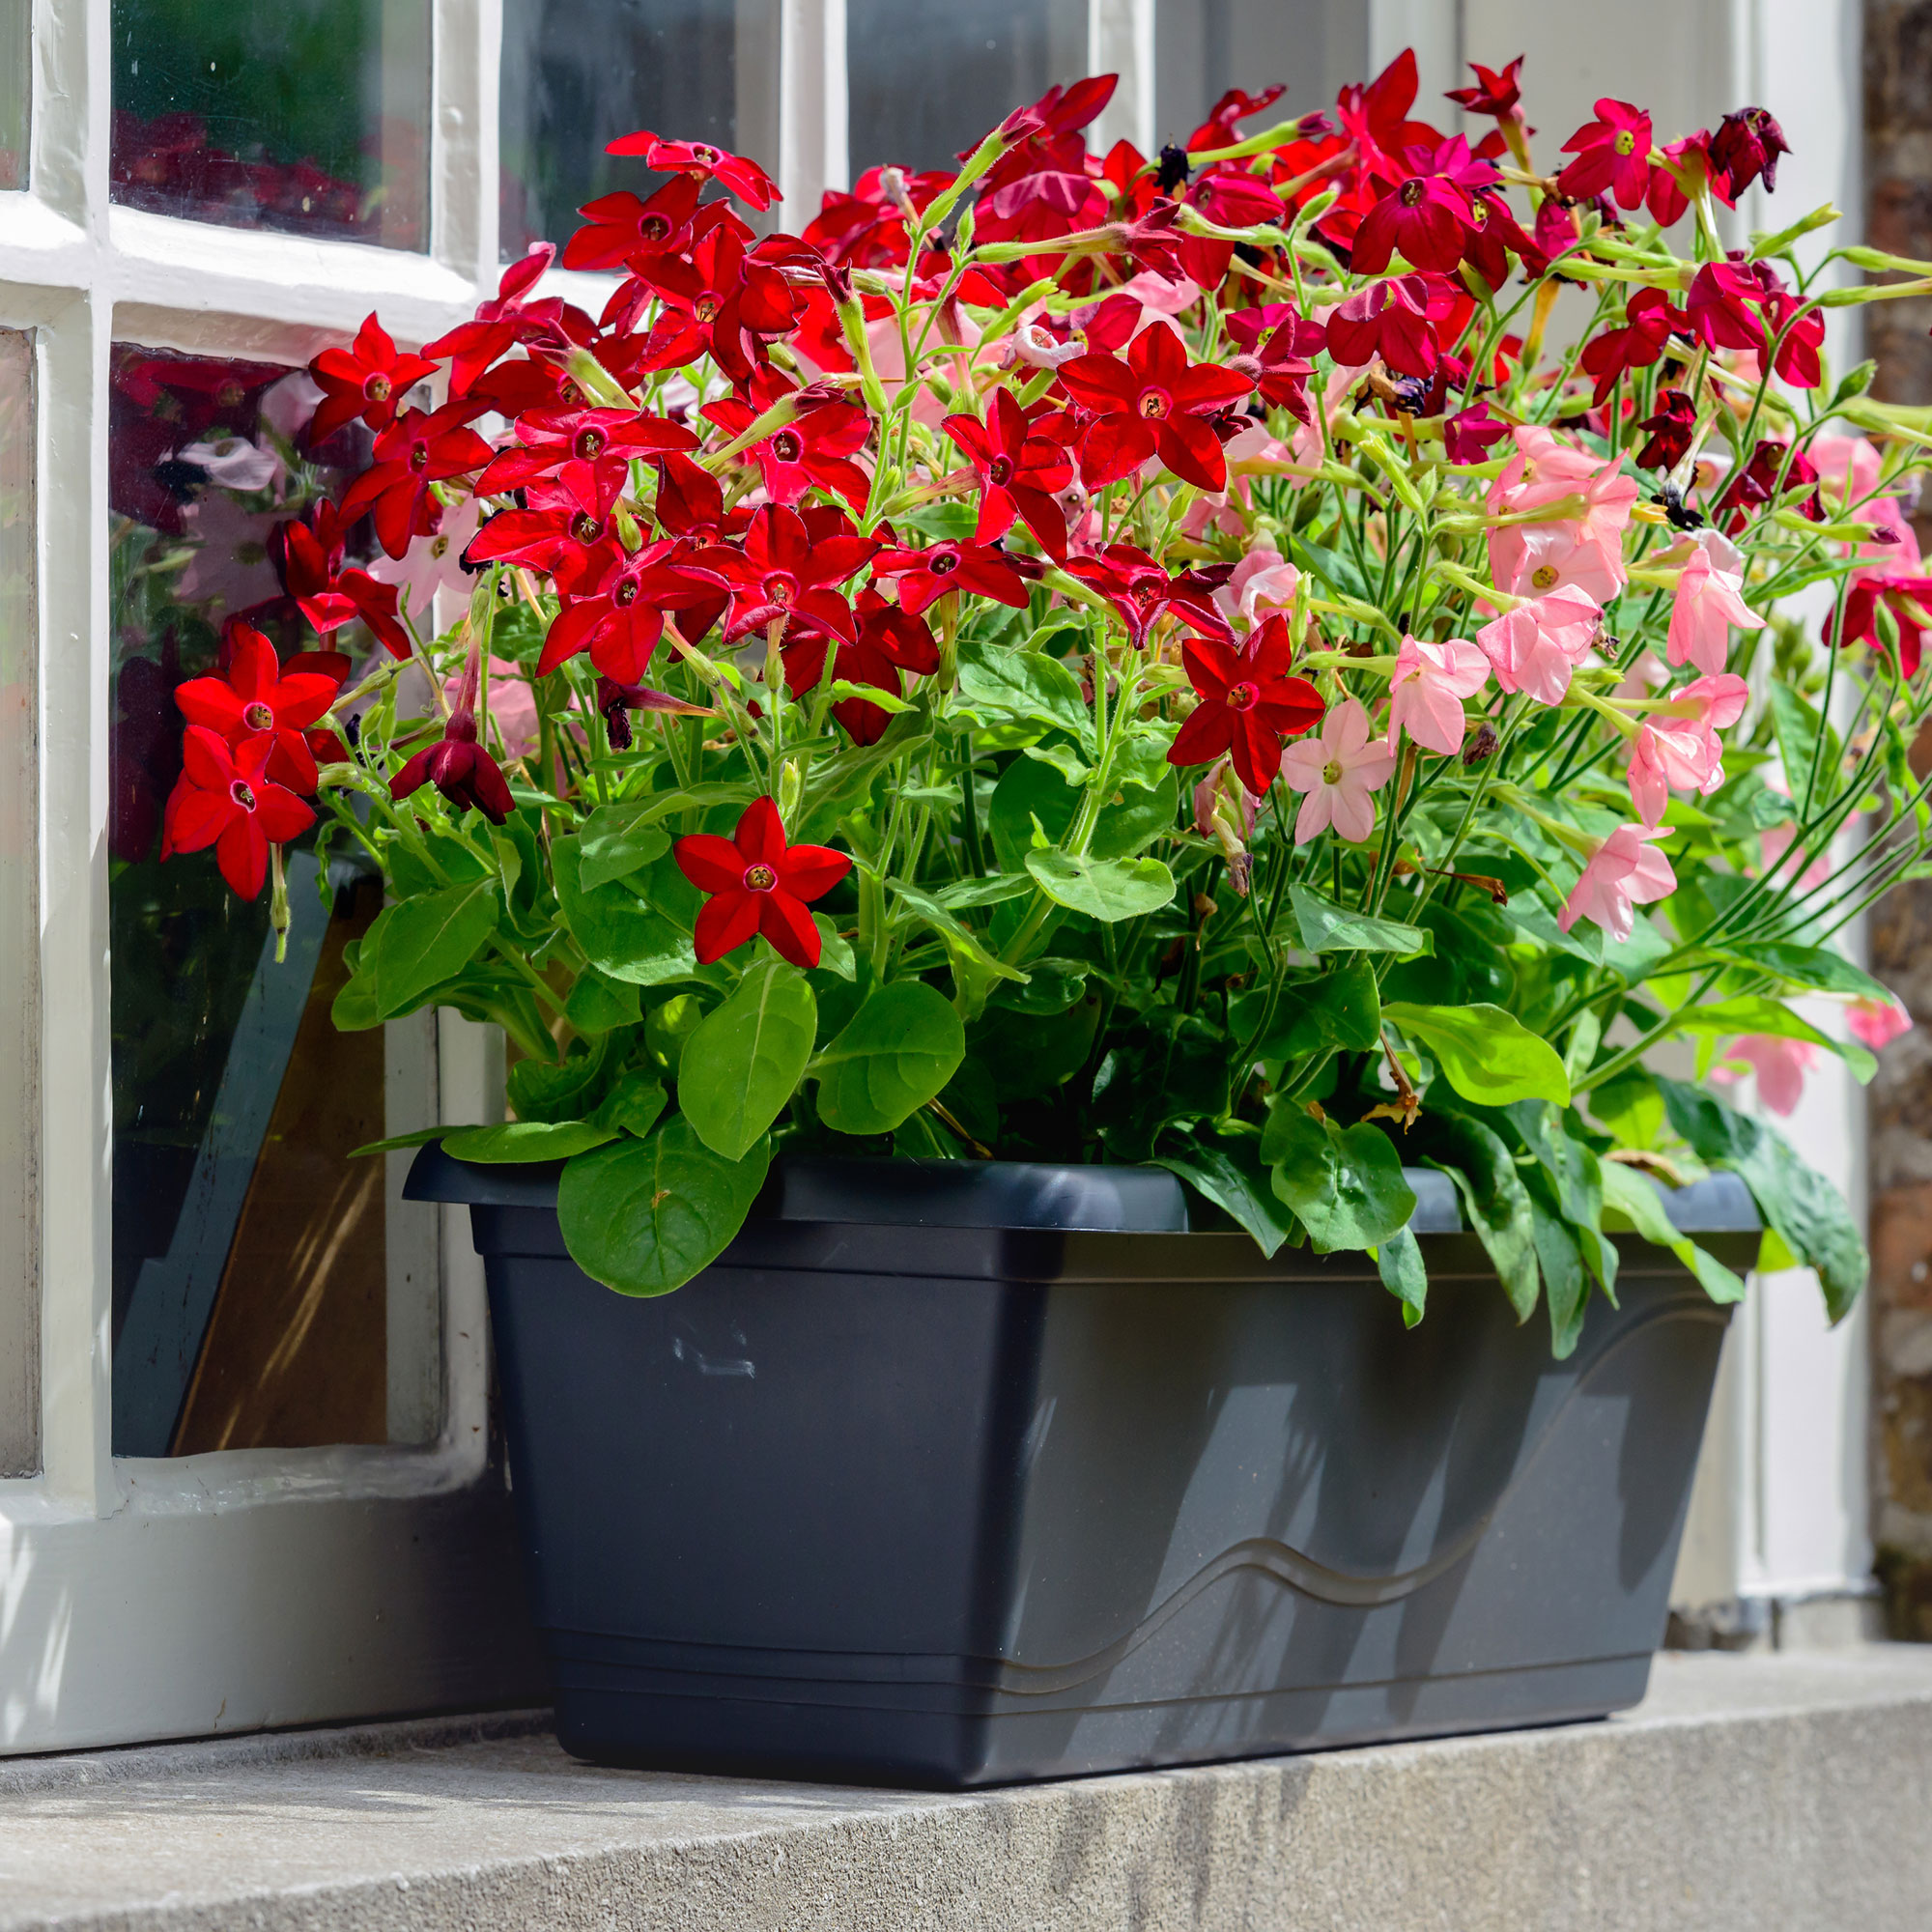 Red flowers in windowbox